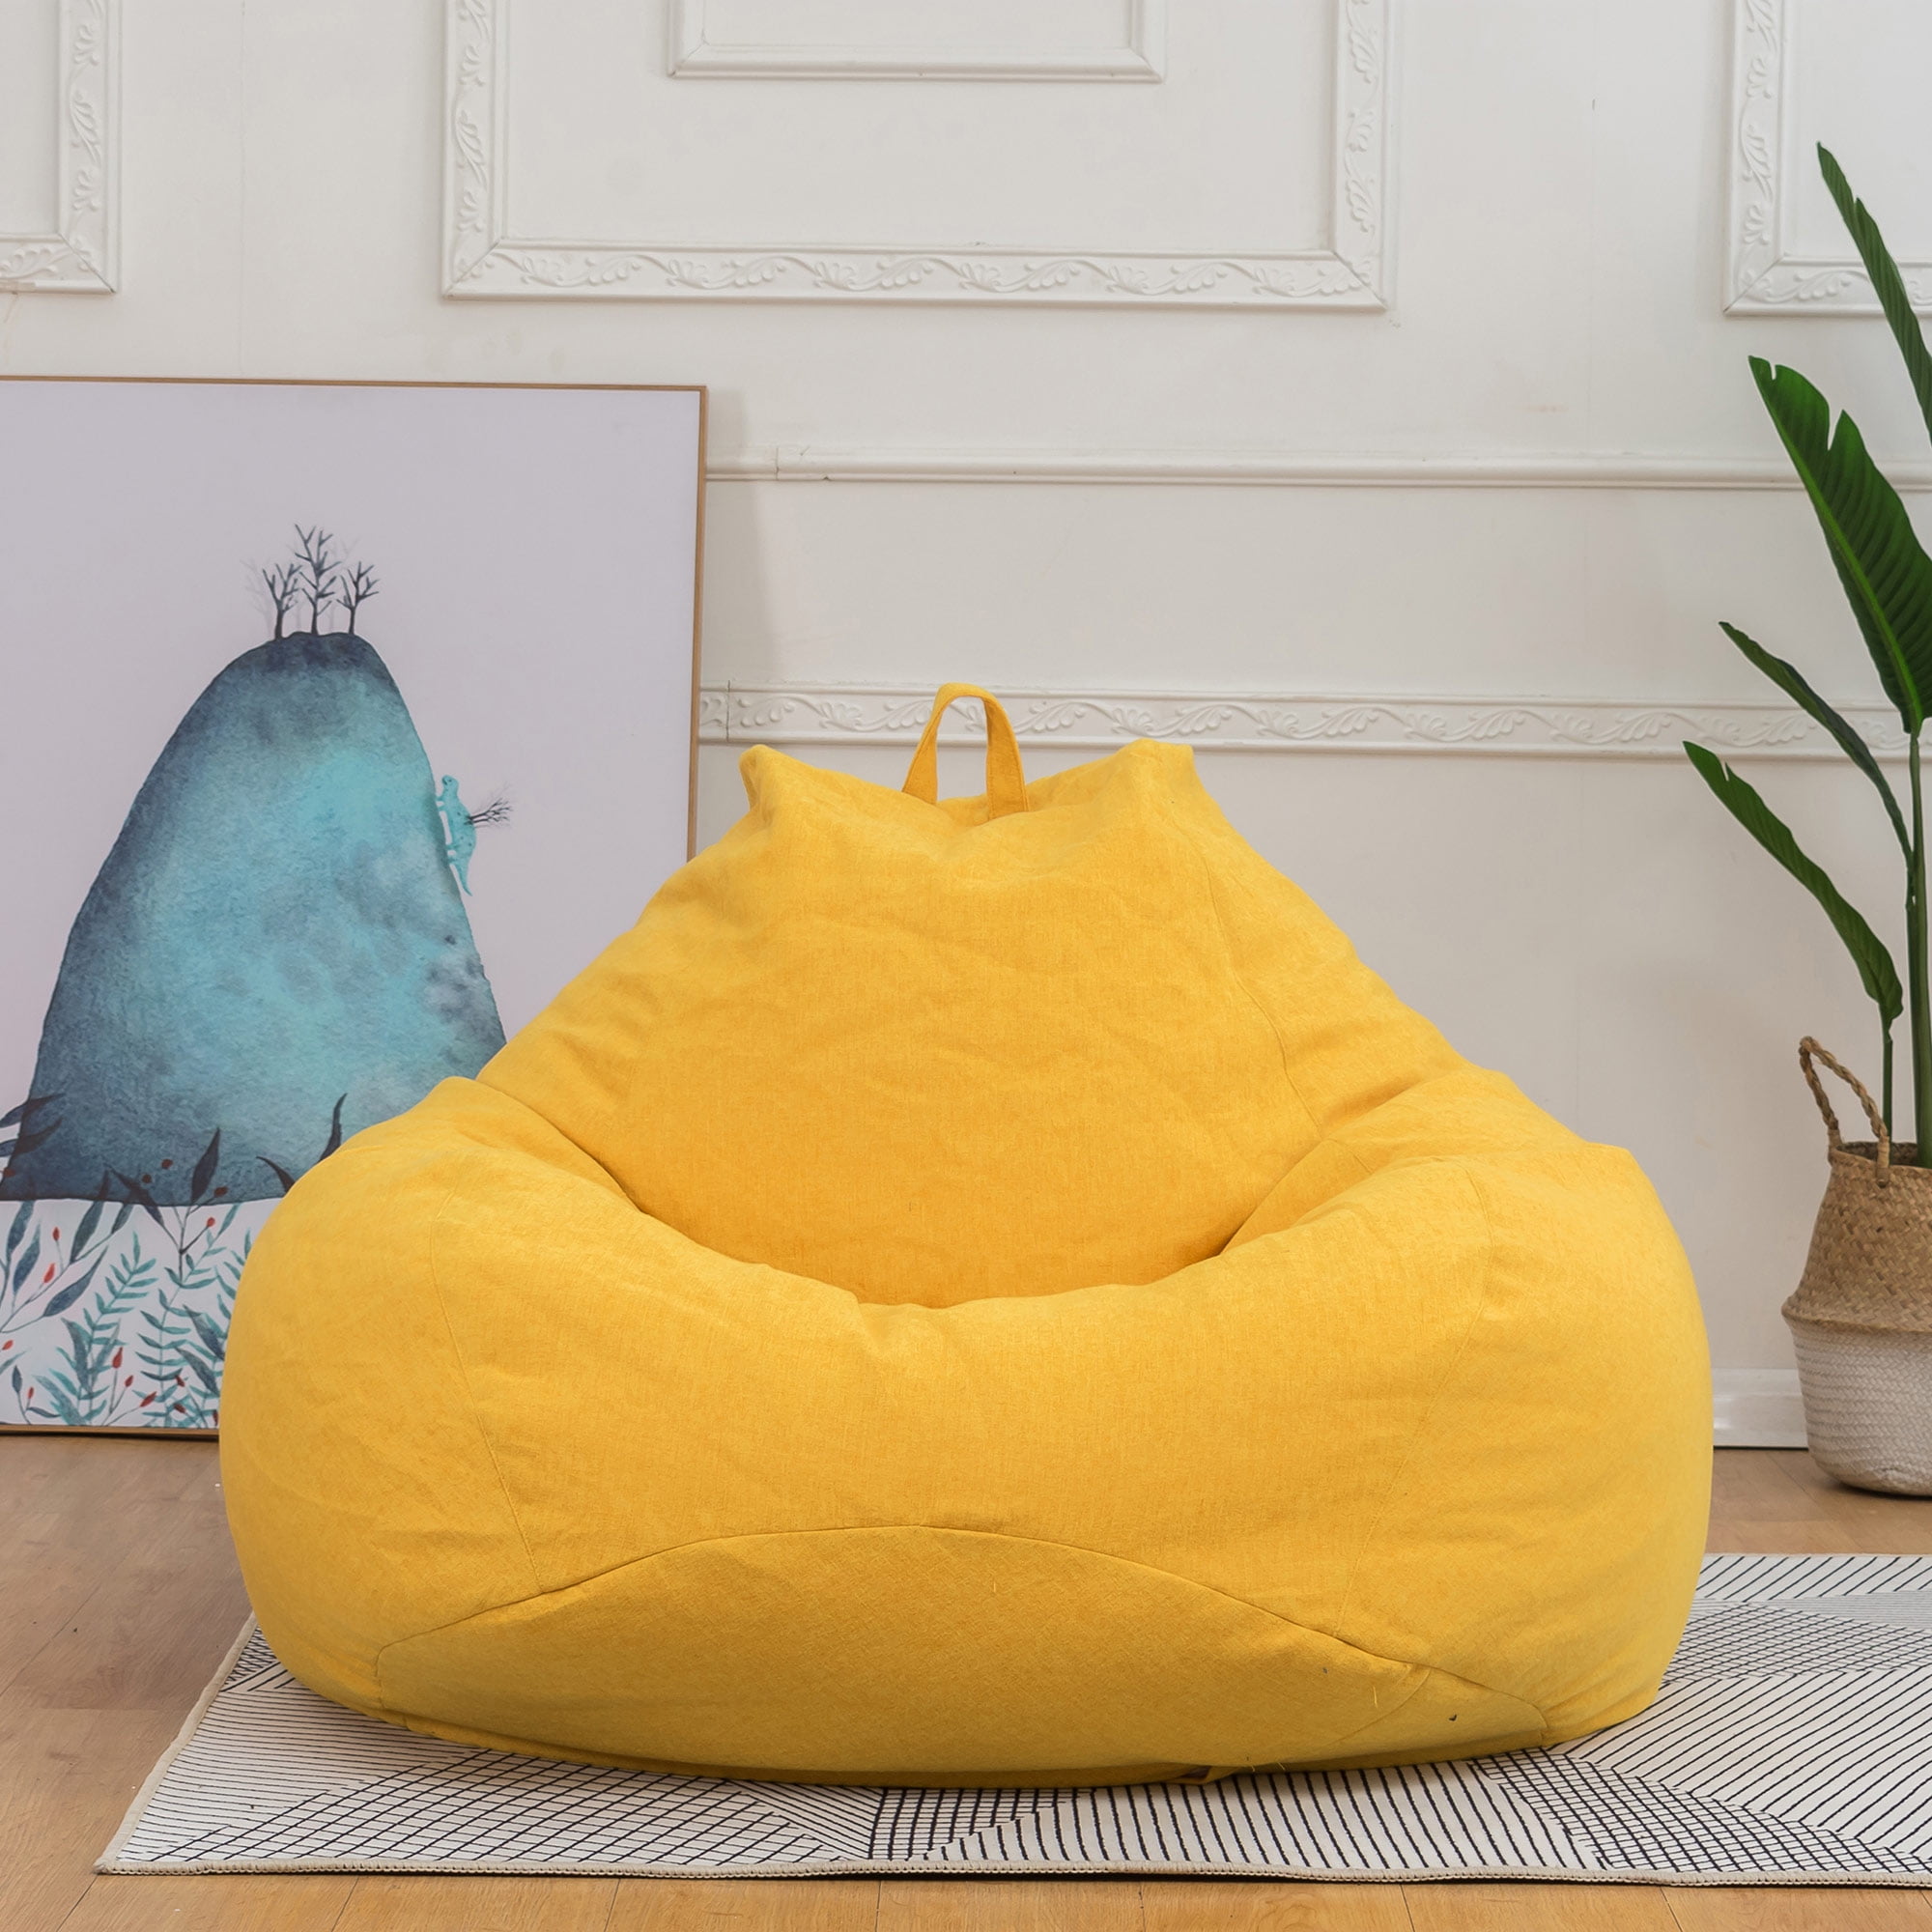 Large Bean Bag Chair Cover Waterproof PU Leather Bean Bag Cover with Handle Without Filler,Black,100x120cm for Indoor and Outdoor Use Lazy Highback Sofa Cover